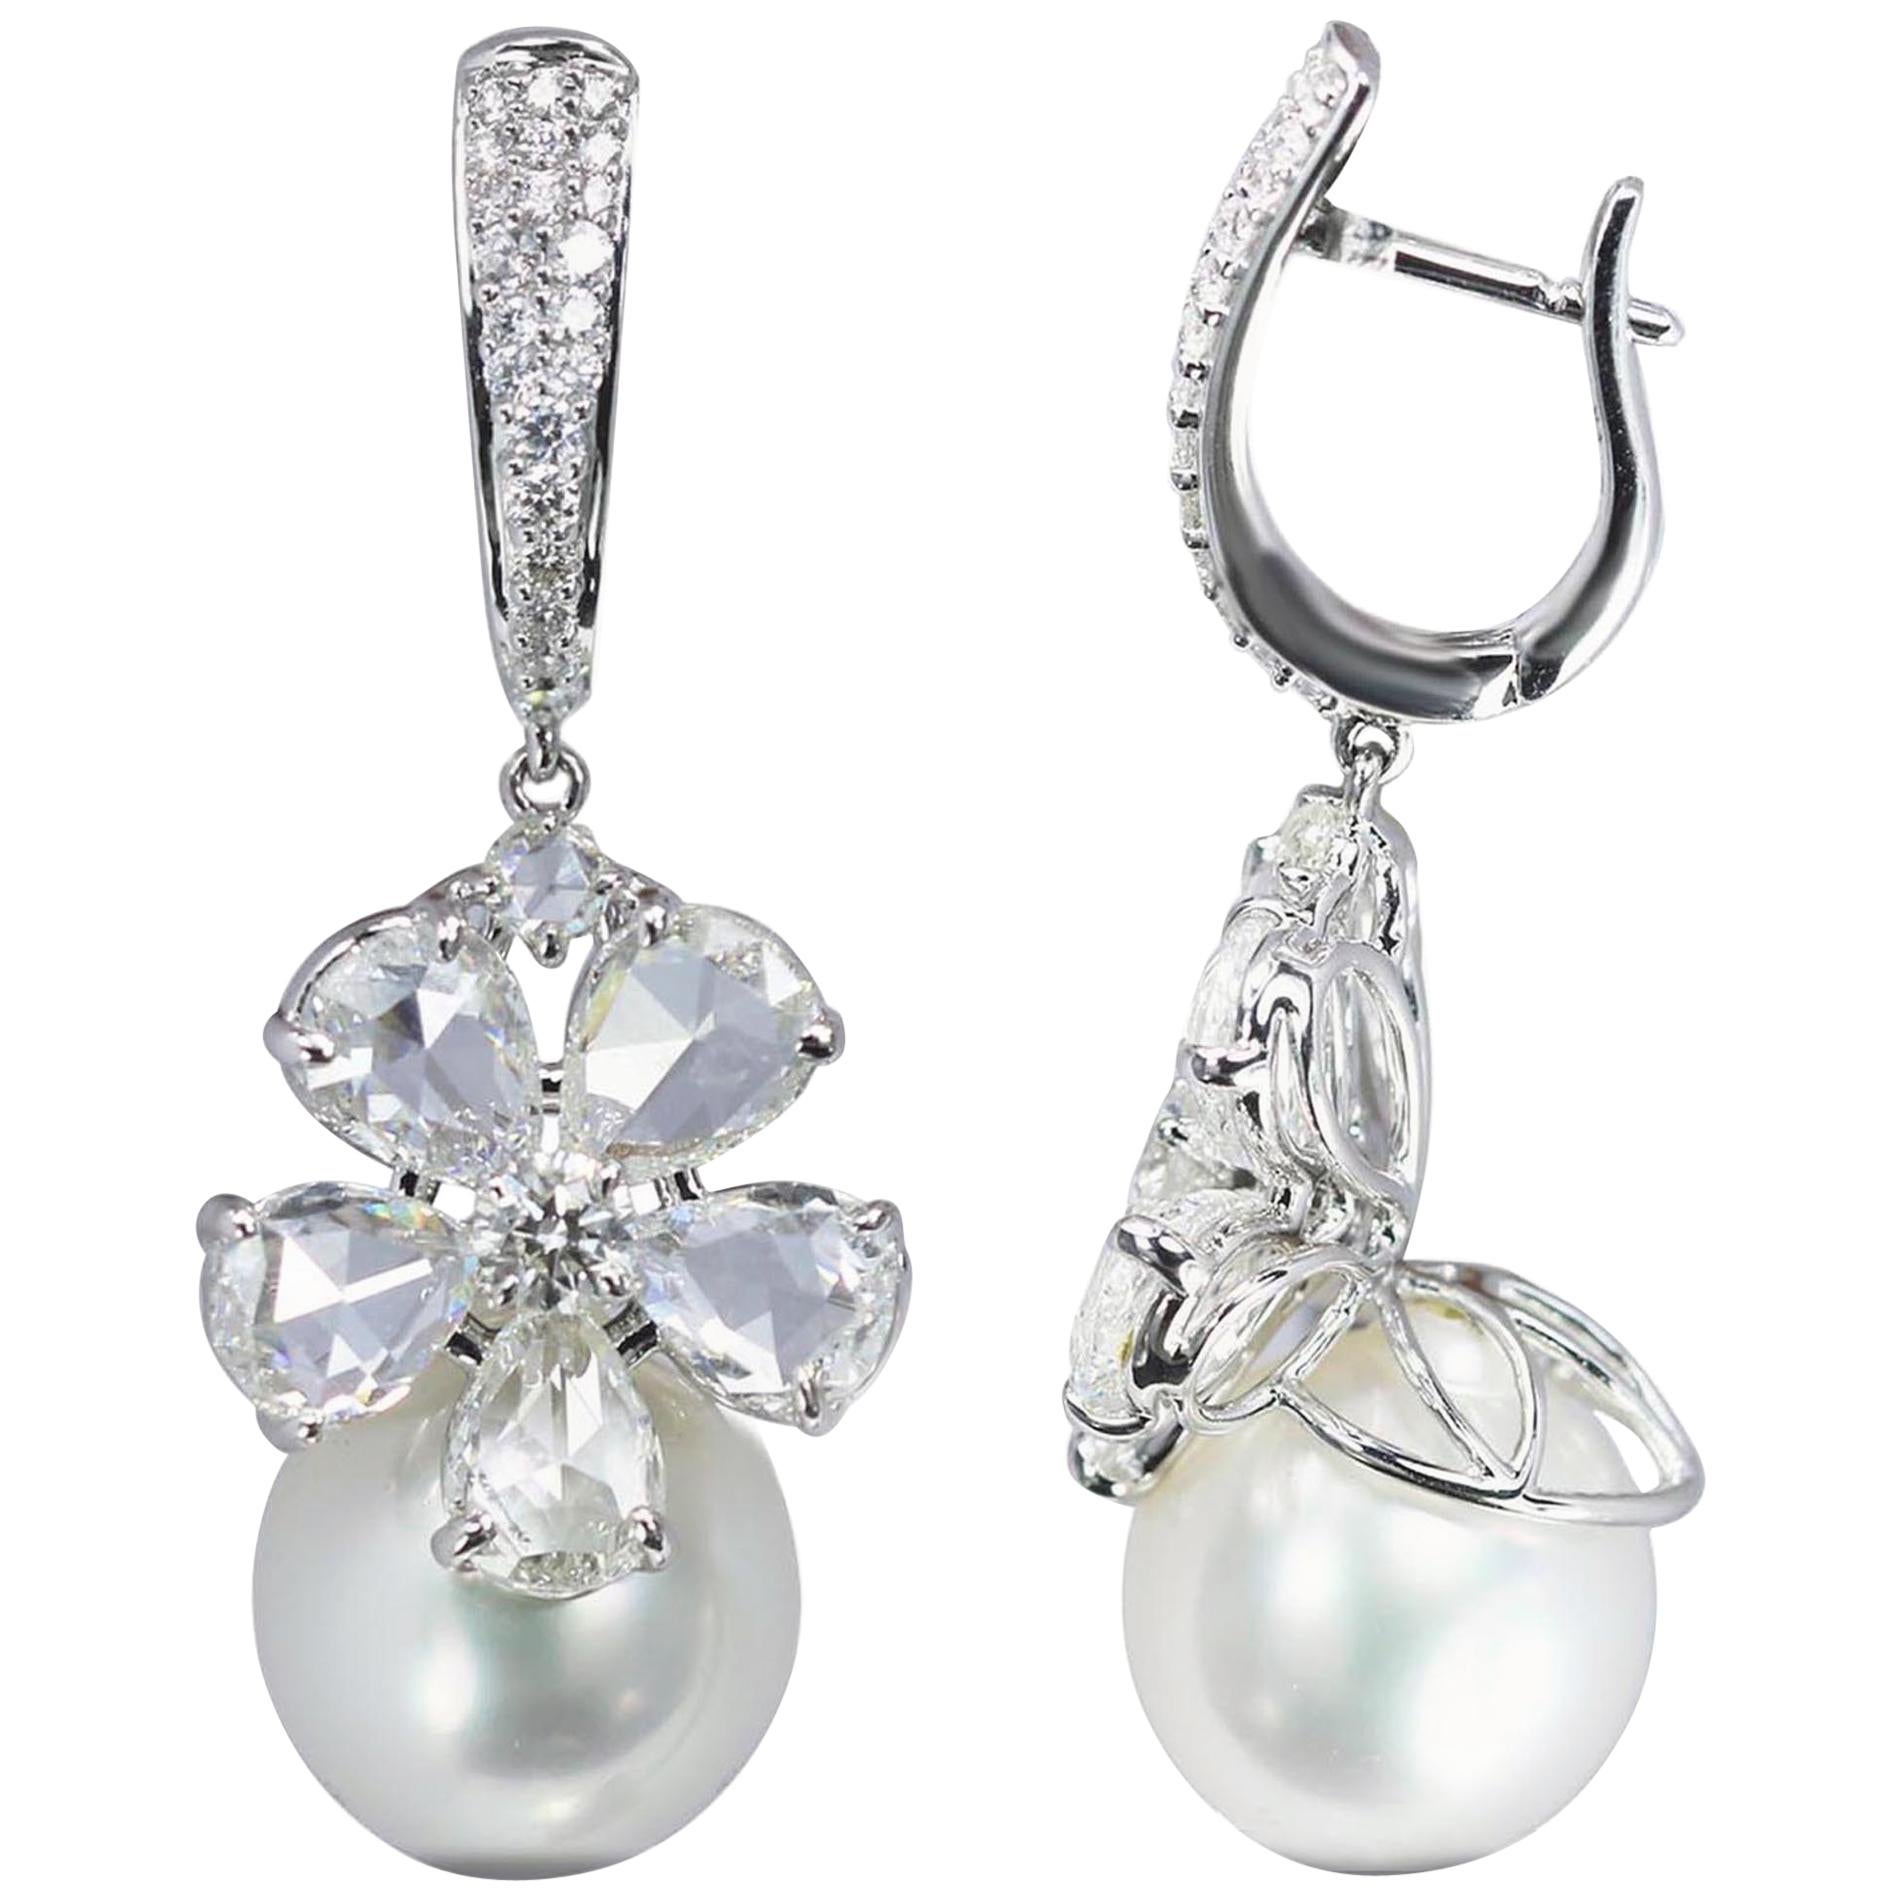 Studio Rêves Rose cut Diamonds and South Sea Pearls Earrings in 18K Gold For Sale